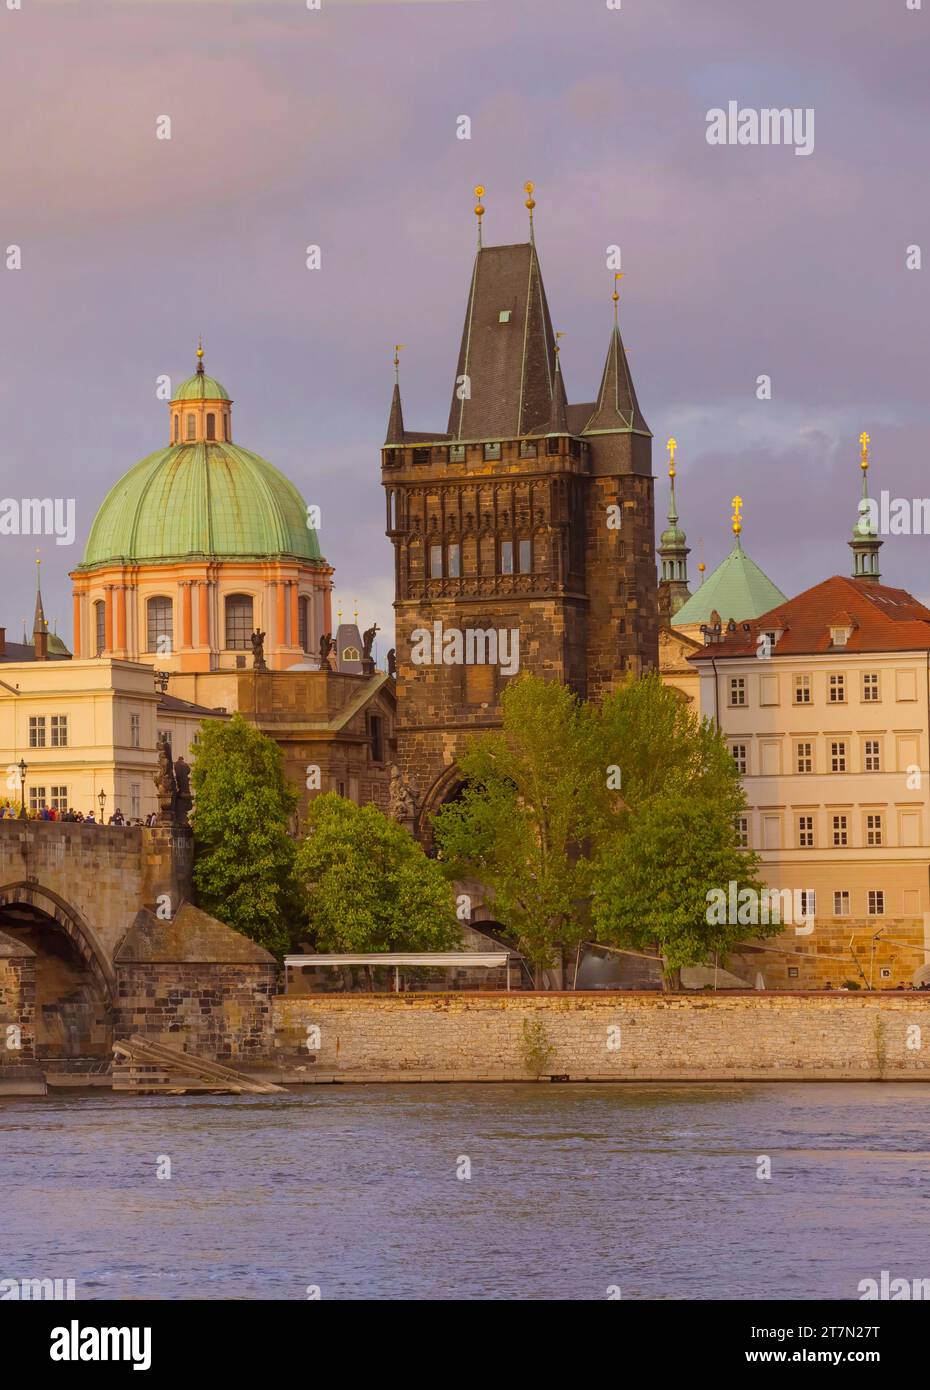 View of old town with Charles Bridge (Karluv Most) on Vltava river and Old Town Bridge Tower, famous tourist destination in Prague, Czech Republic Stock Photo